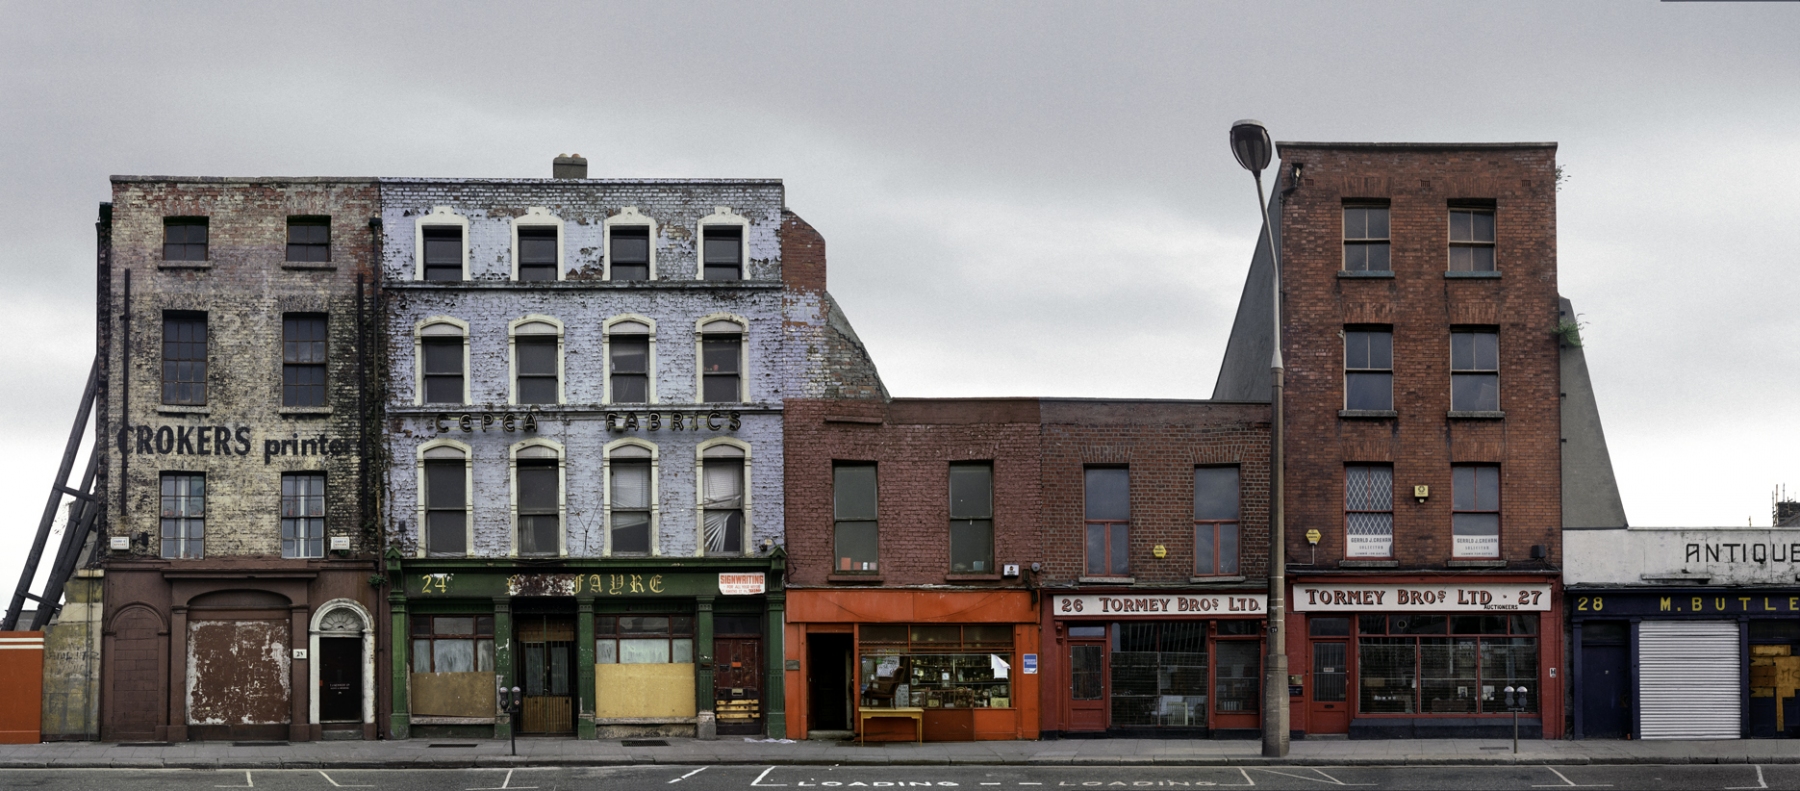 Auction House and Antique shops on Lower Ormond Quay, Dublin 1988 by David Jazay